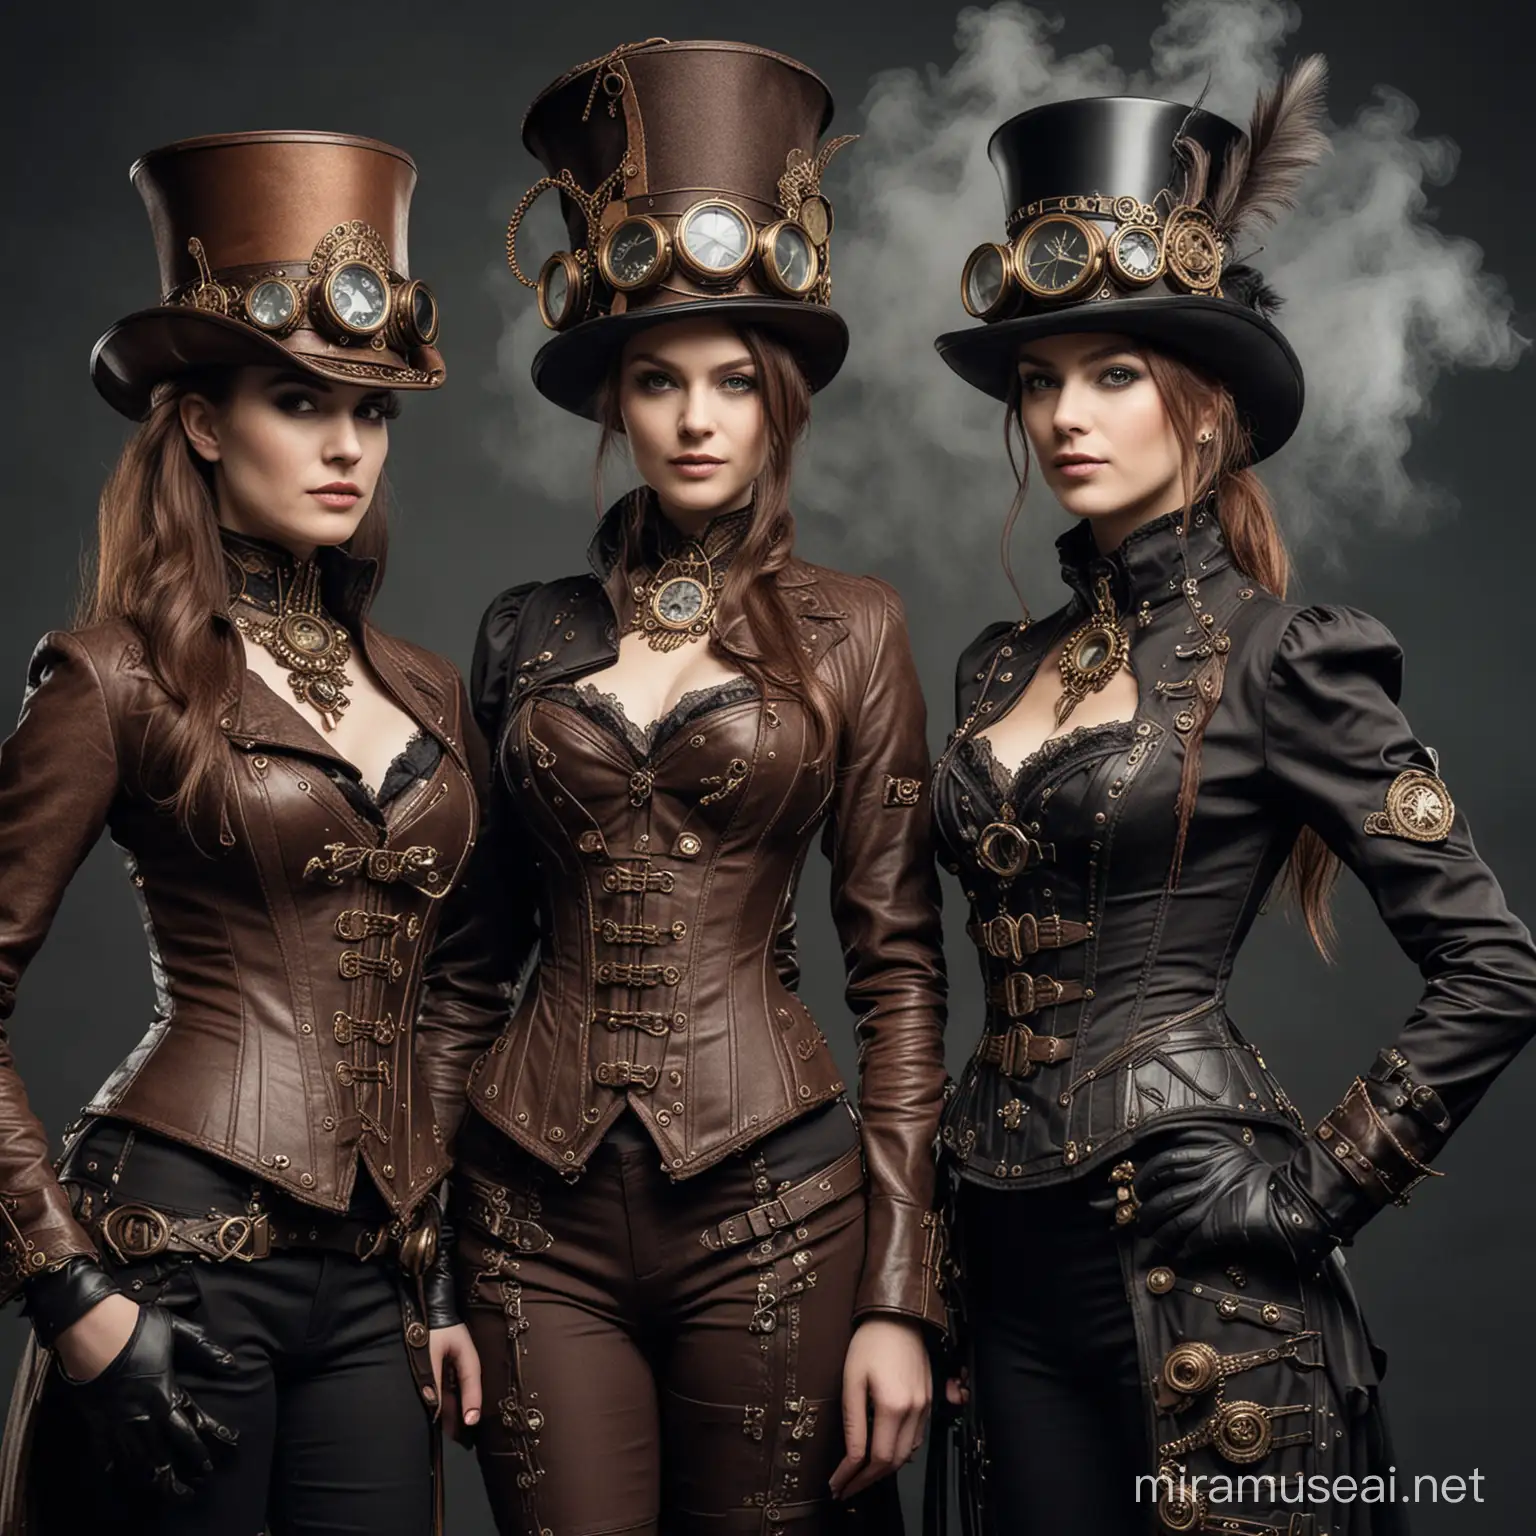 Steampunk Fashion Show Rival Fashion Houses Competing with Clockwork Creations